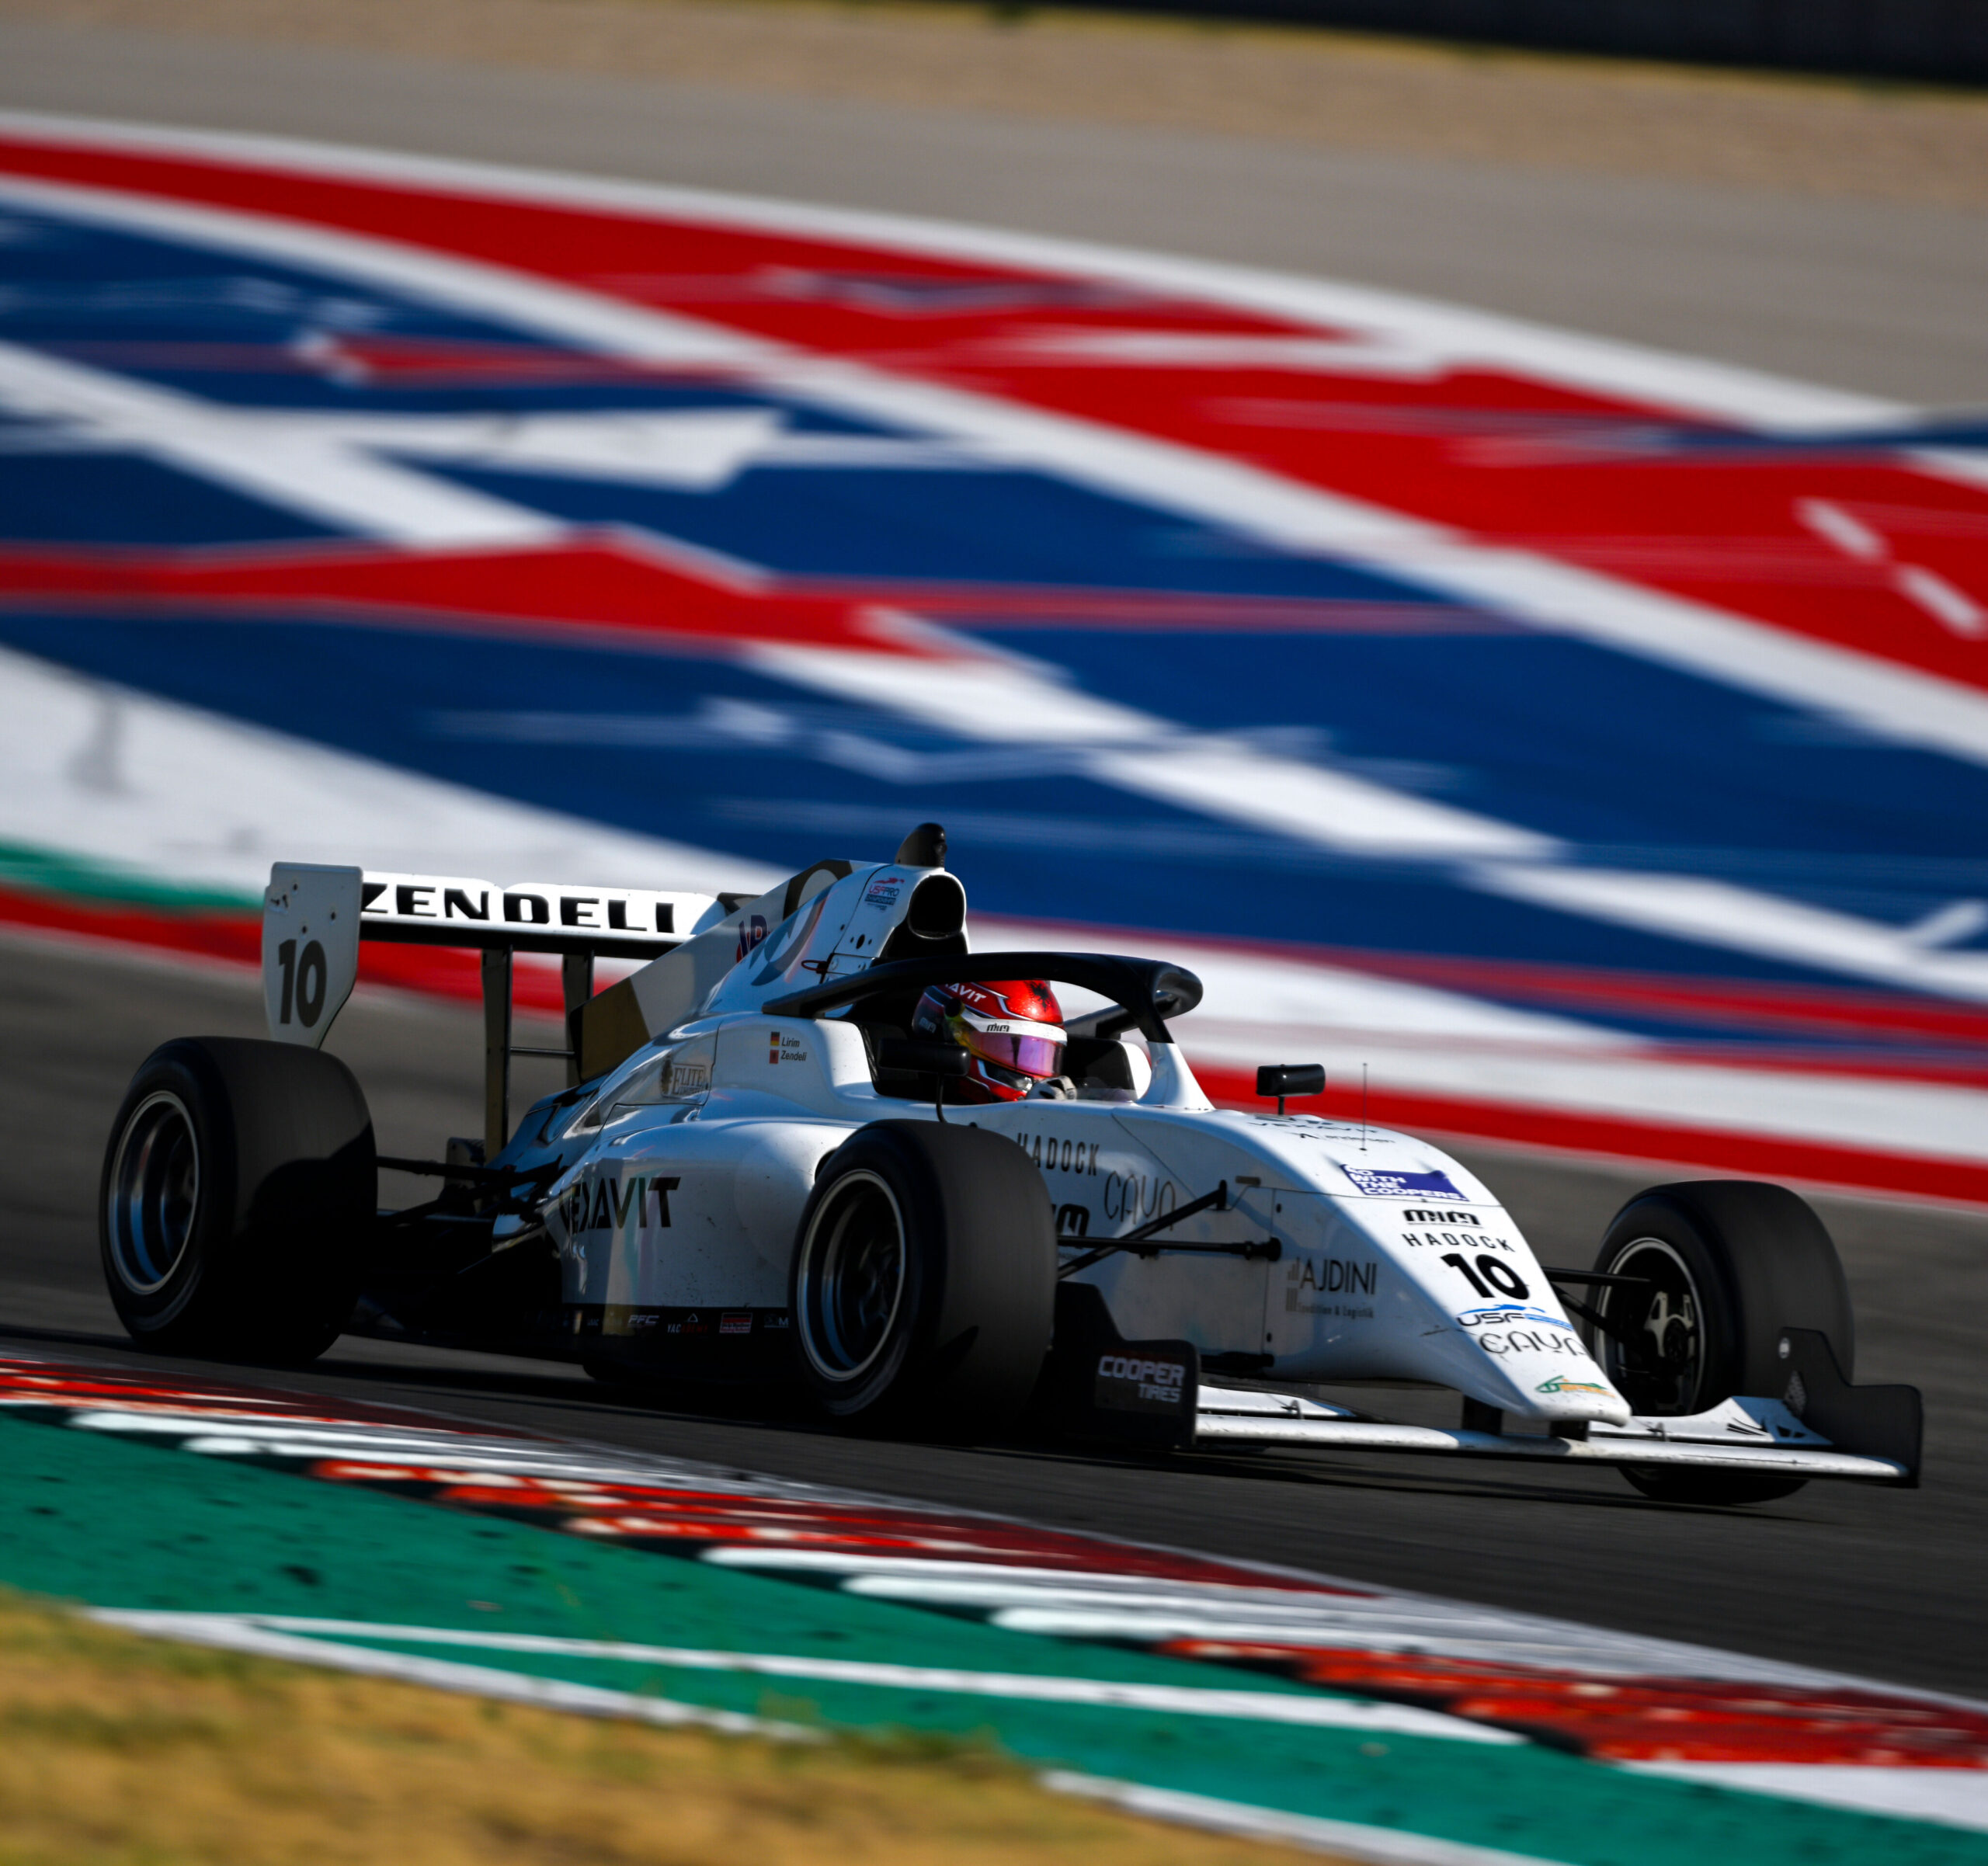 SOLID DOUBLE POINT FINISH FOR ZENDELI AT COTA